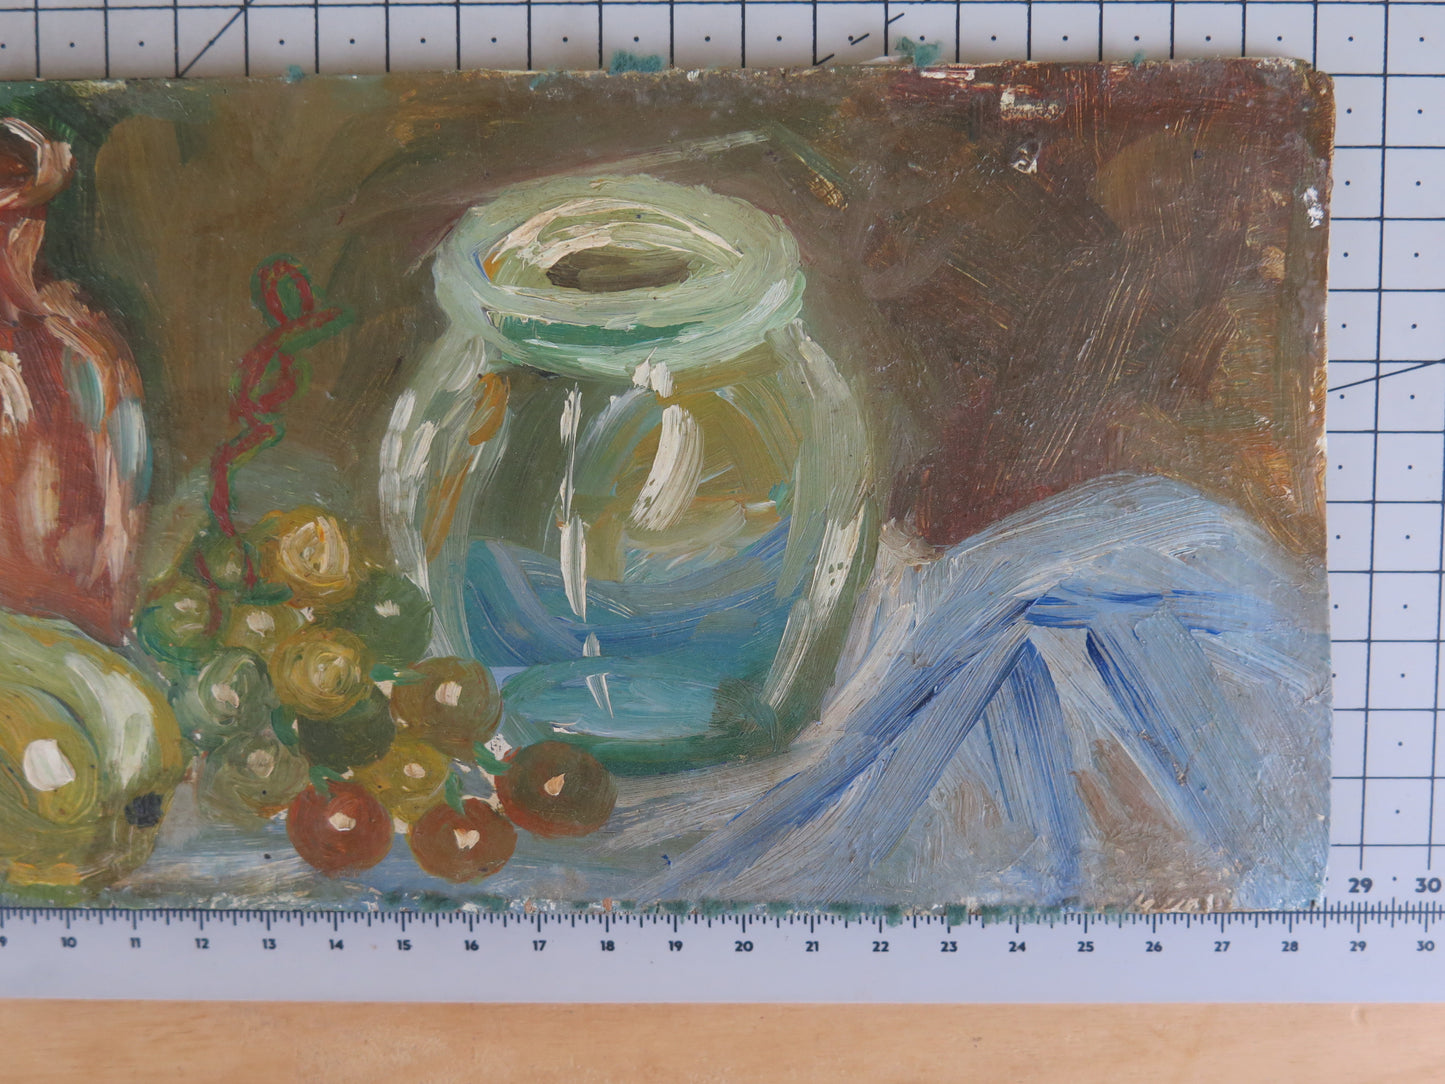 28x12 cm OLD OIL PAINTING ON TABLE INTERIOR STILL LIFE TABLE OBJECTS MD12